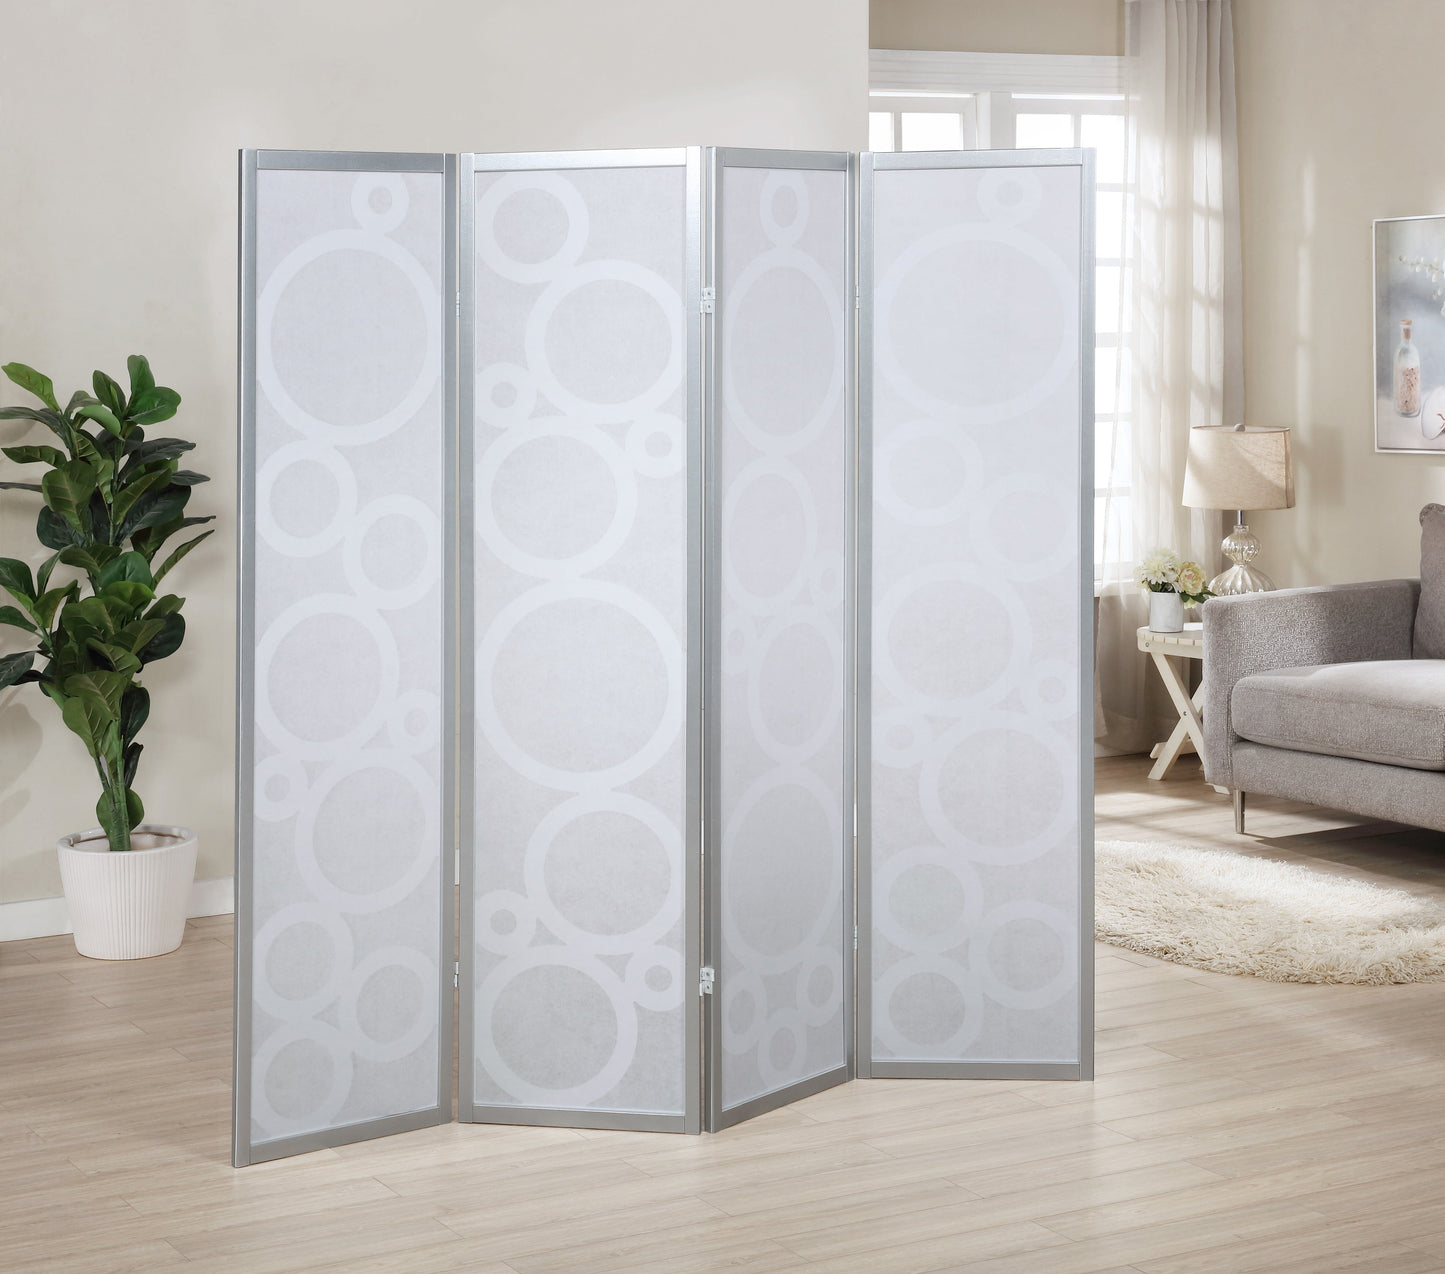 Arvada 4-Panel Wood Room Divider with Circle Pattern, Silver